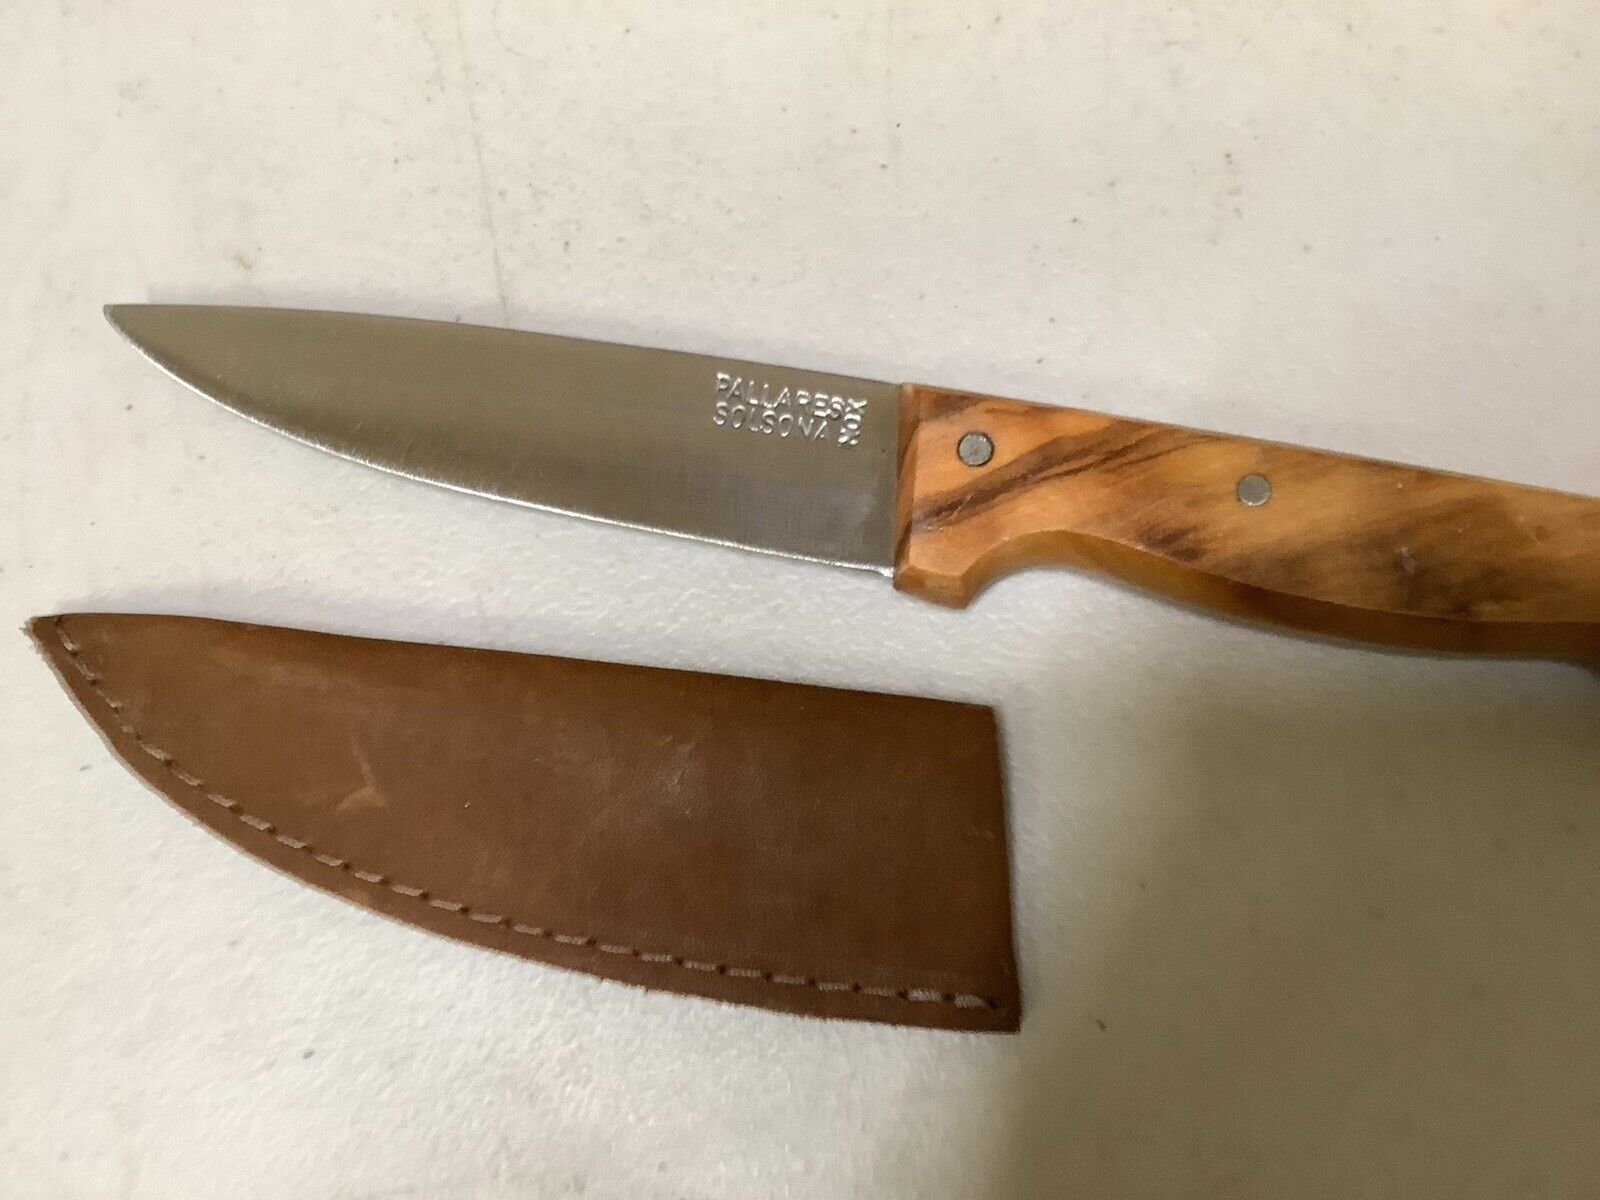 Pallares Solsona Unique Special Exotic Wood Handled Knife - Great Condition